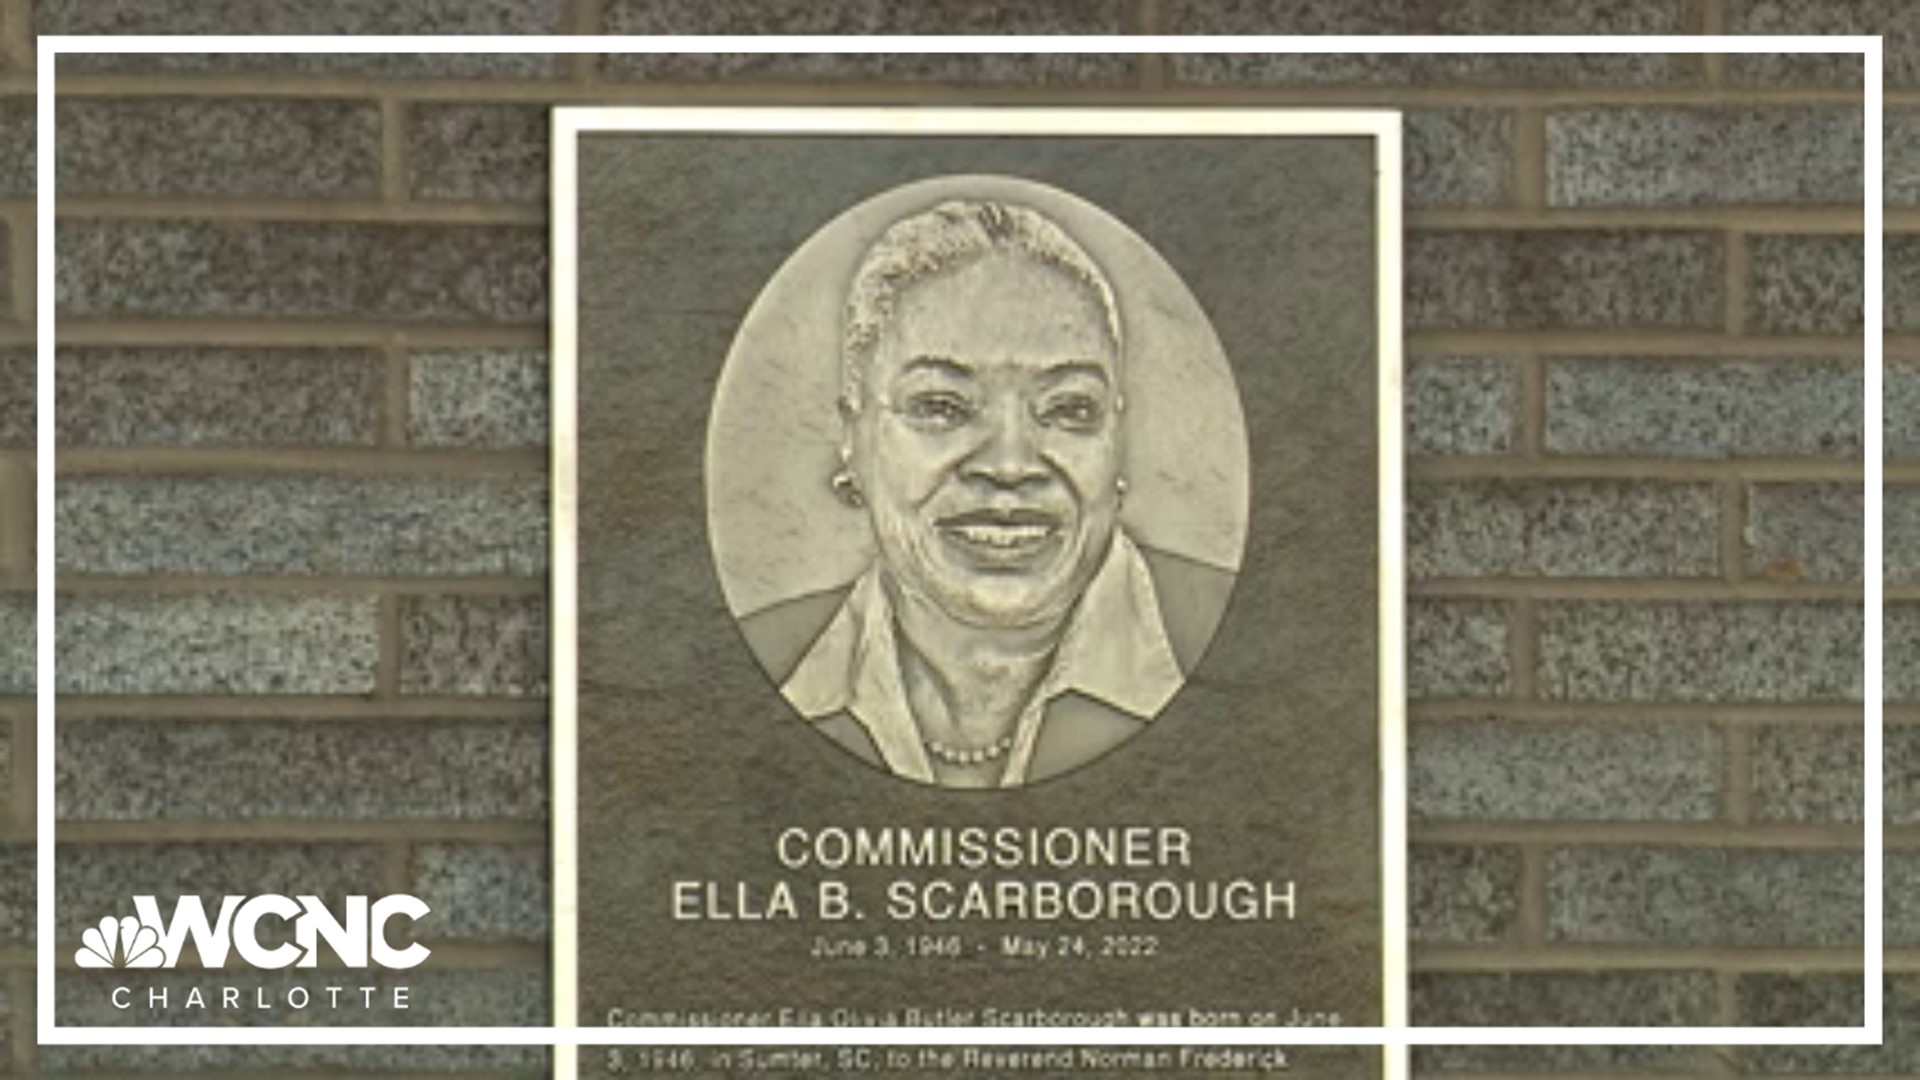 The three-story building honors Ella Scarborough, who was the first African American board chair in the county.